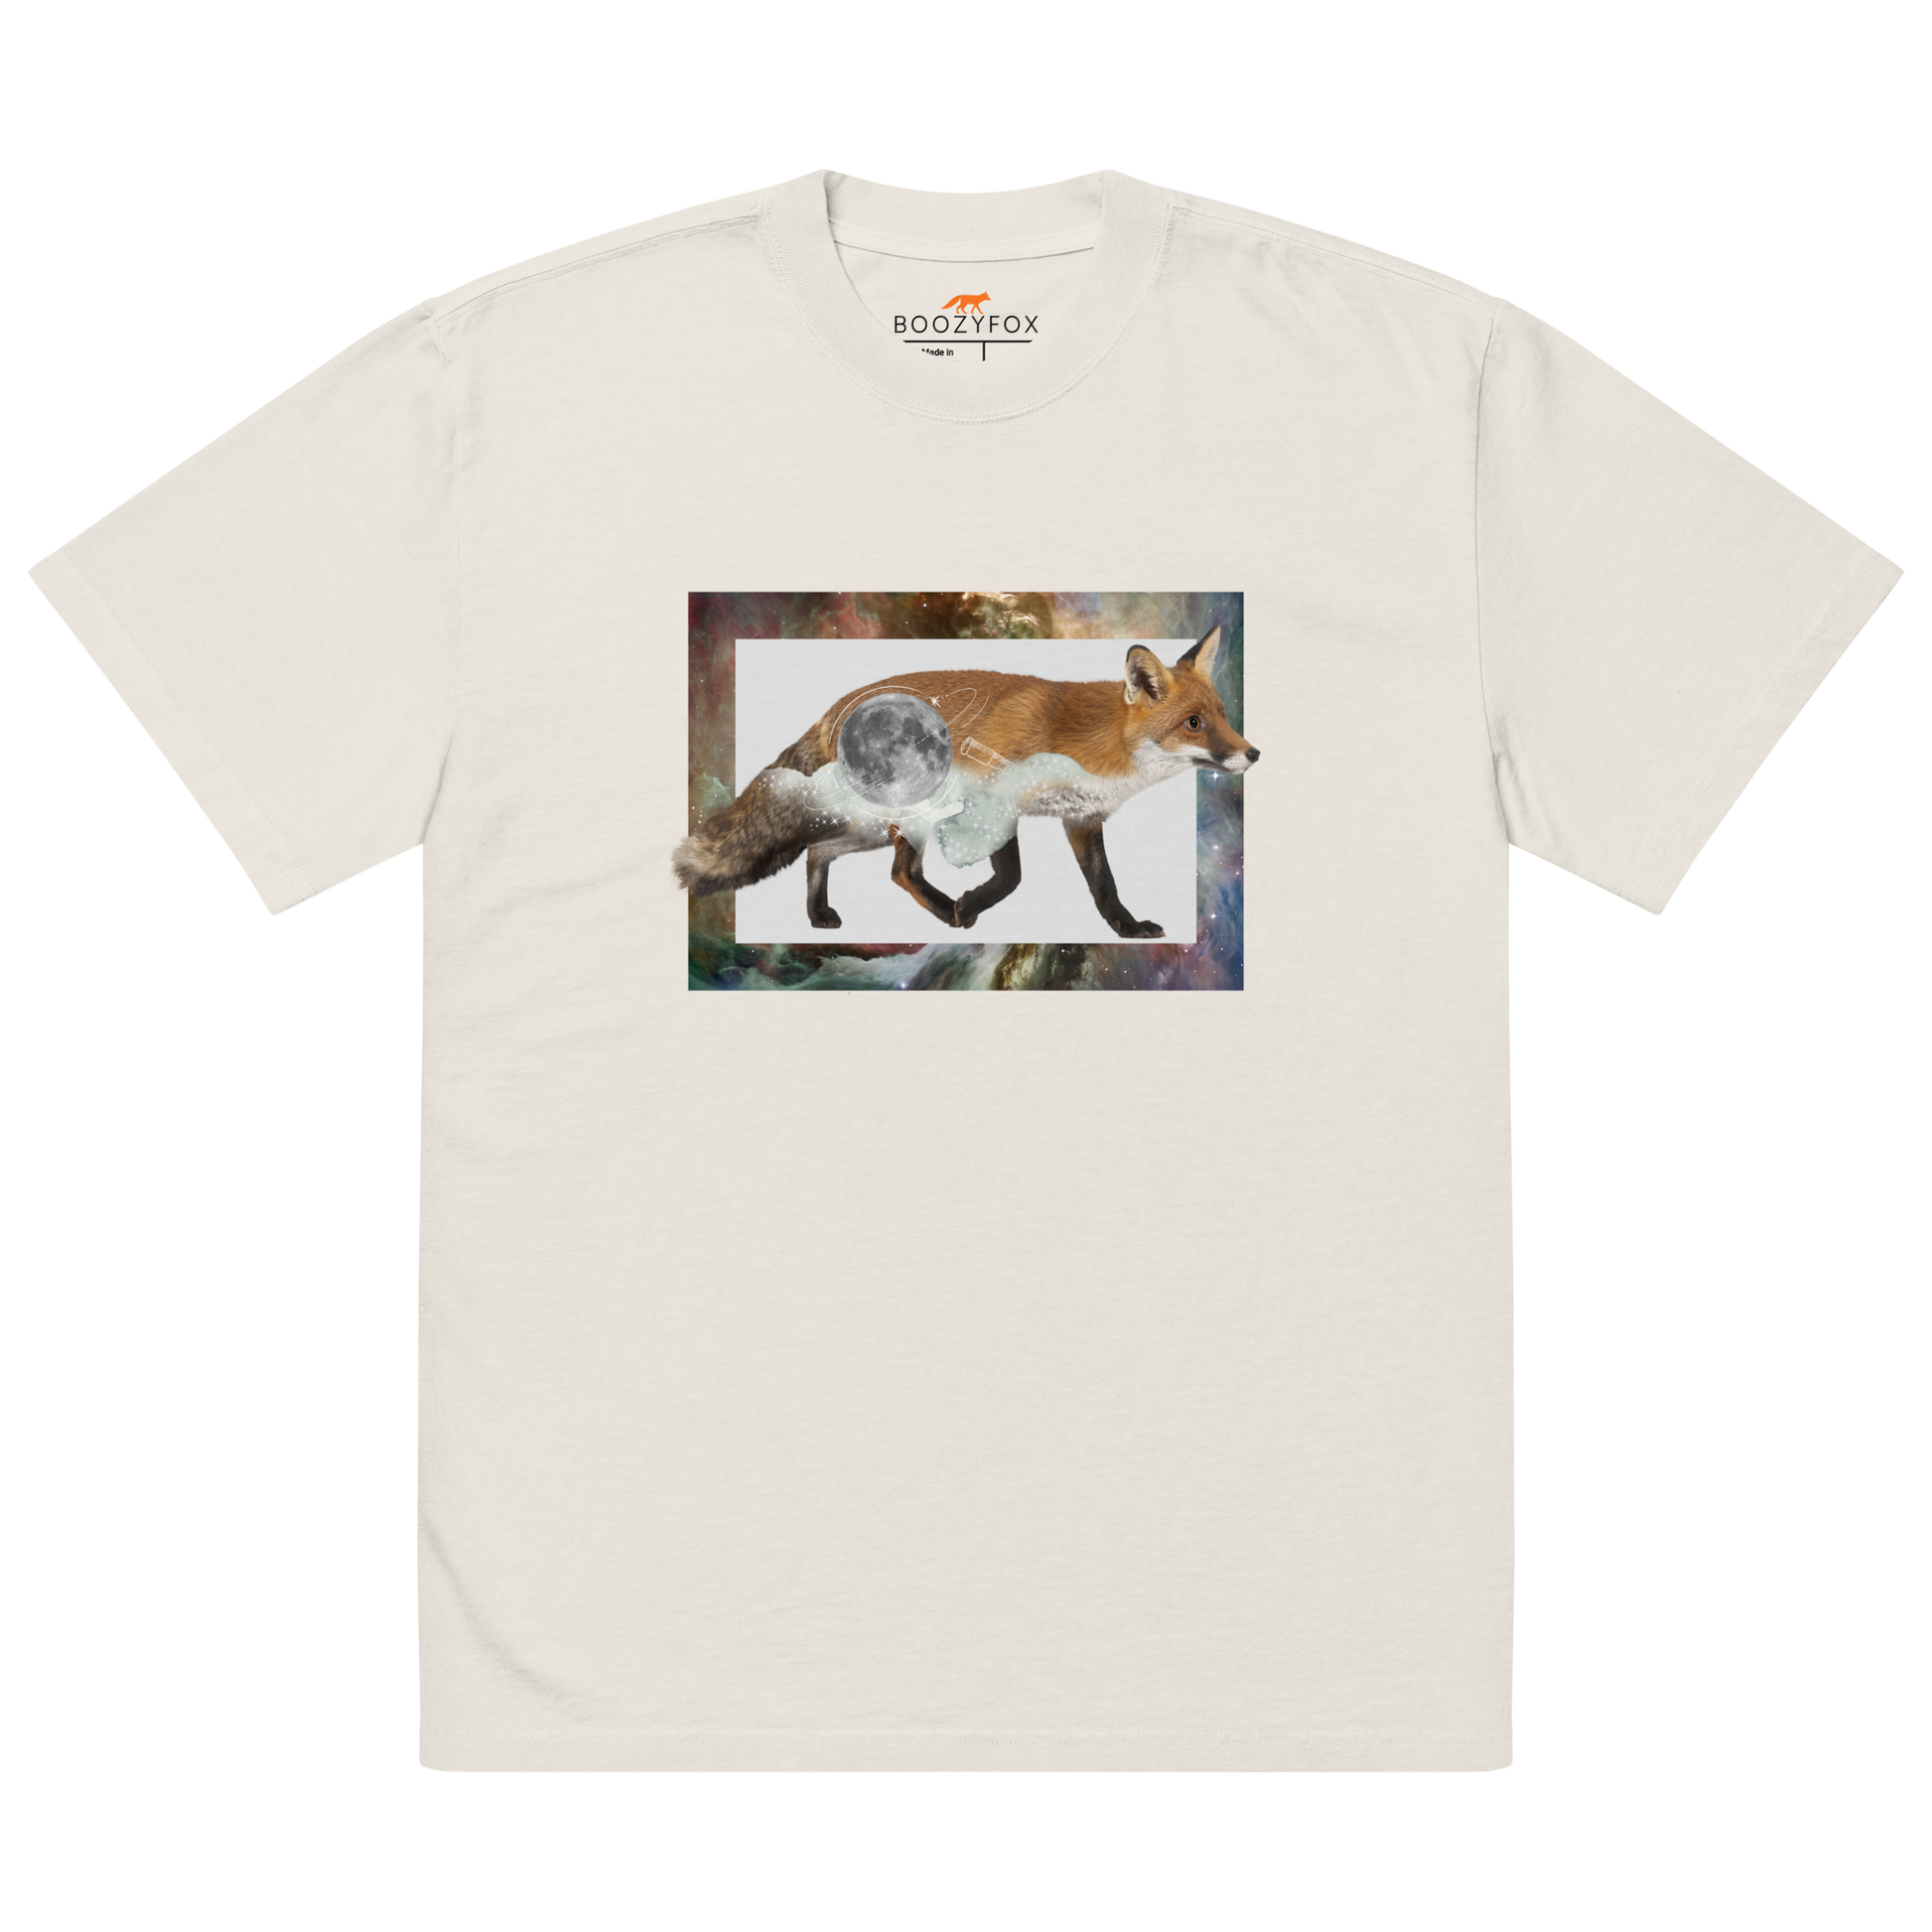 Faded Bone Fox Oversized T-Shirt featuring a stellar Space Fox graphic on the chest - Cool Graphic Fox Oversized Tees - Boozy Fox